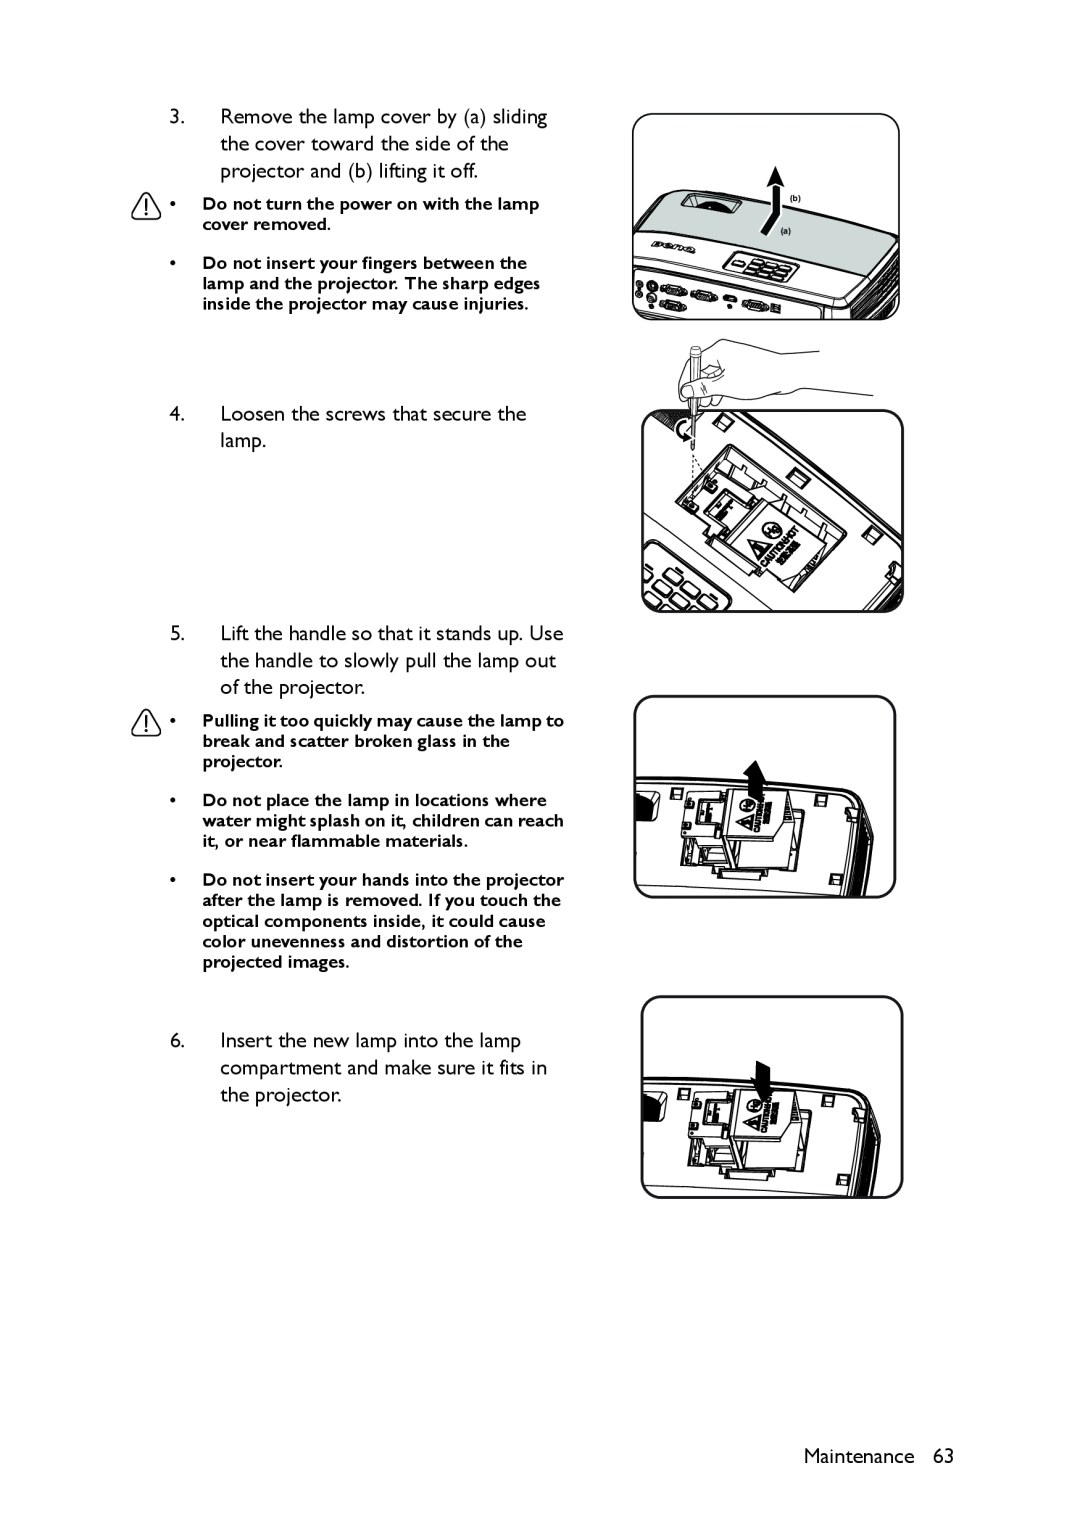 BenQ MS517 user manual Do not turn the power on with the lamp cover removed 